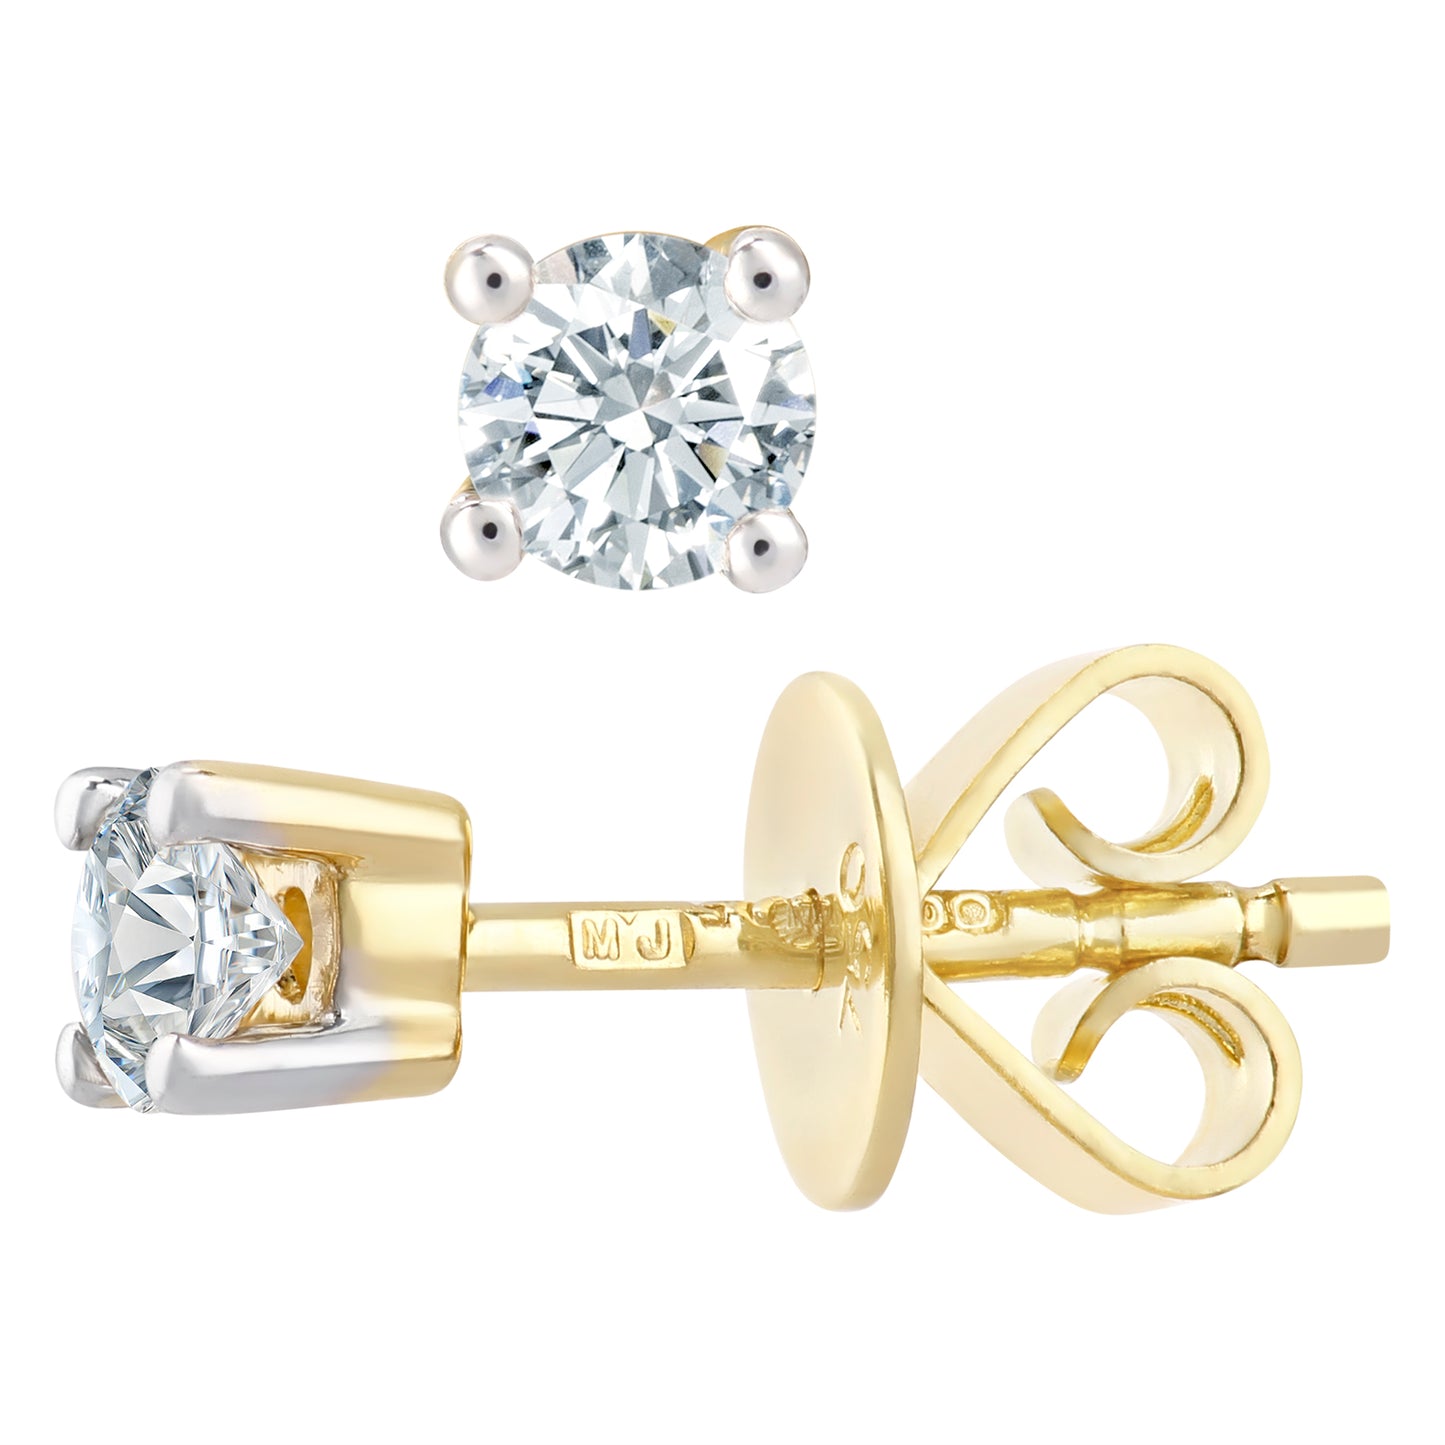 18ct Gold  Round 1/4ct Diamond Solitaire Stud Earrings - PE0AXL375718KY